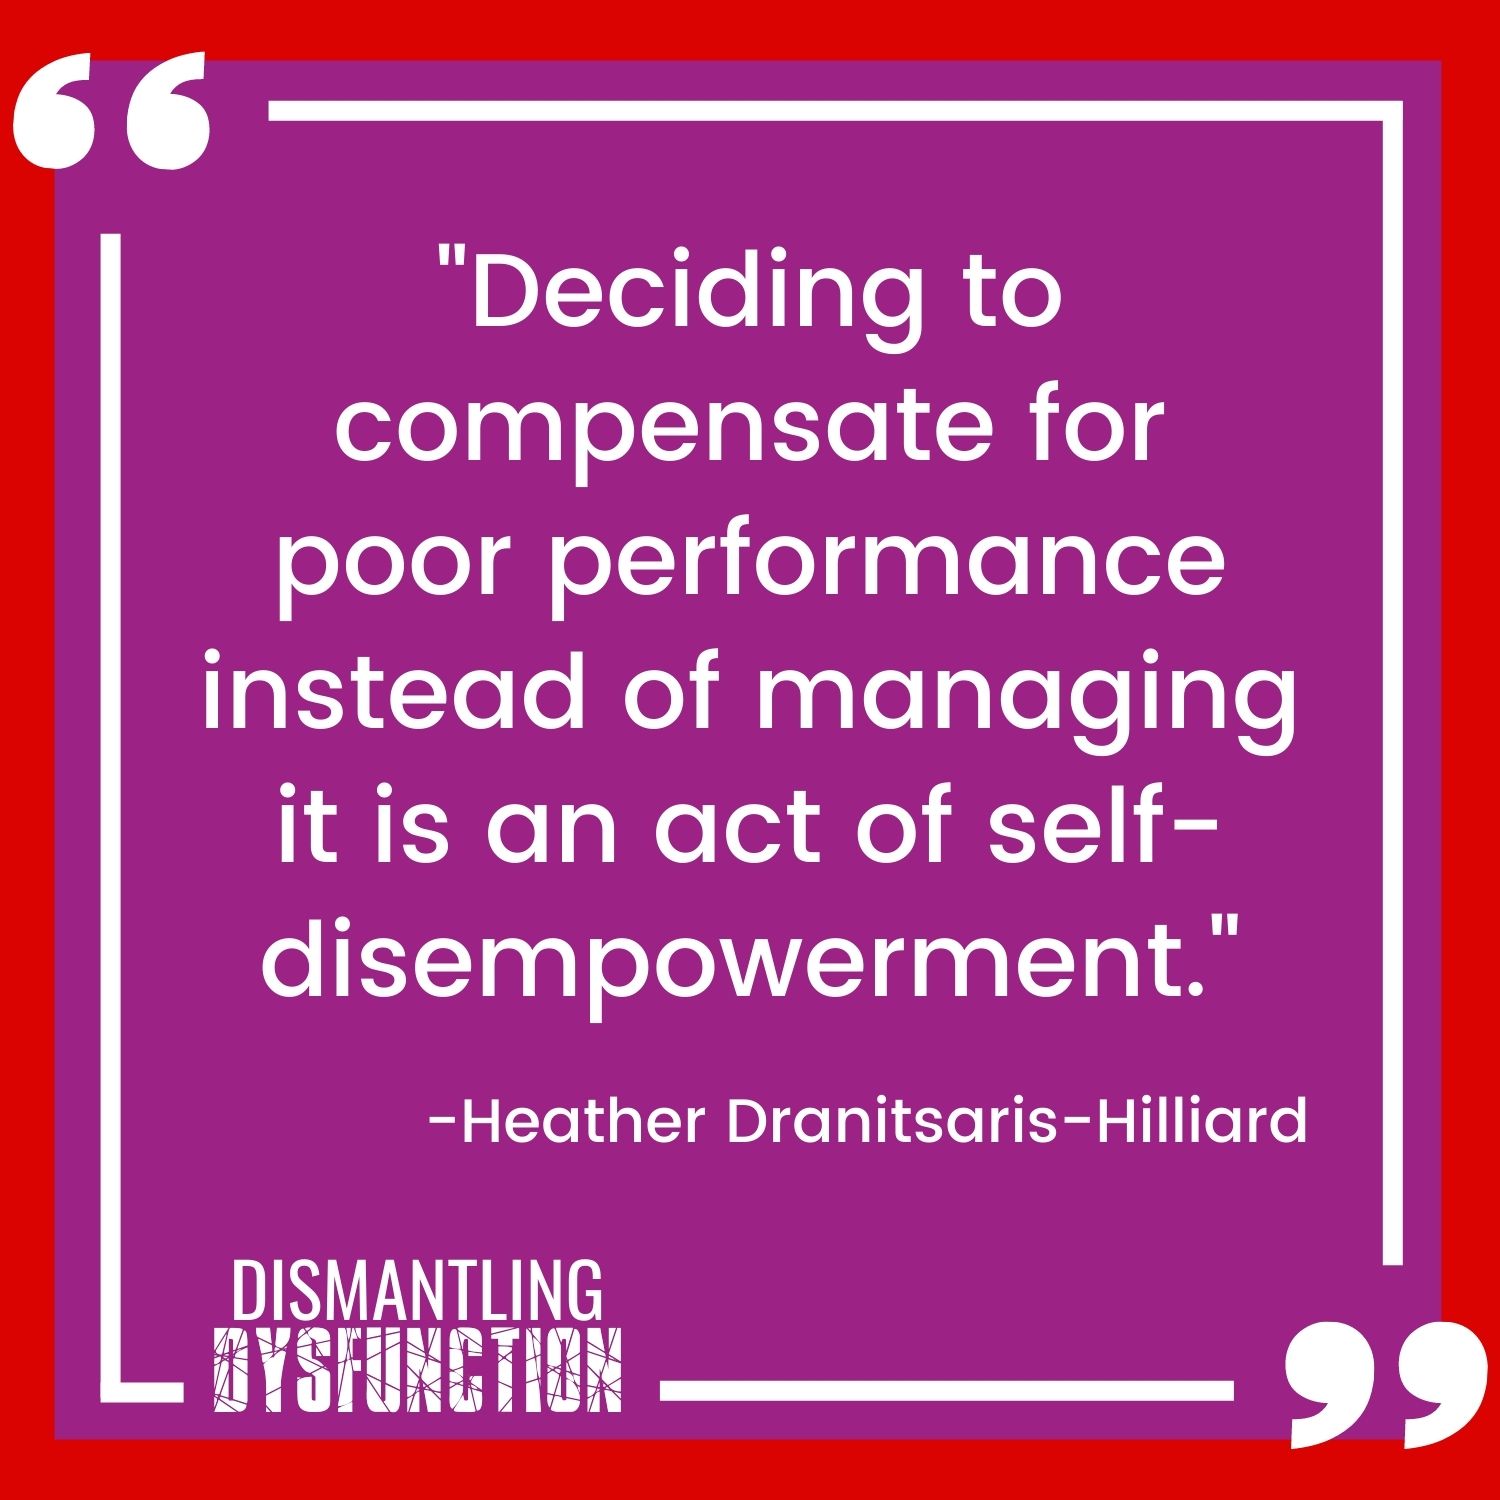 "Deciding to compensate for poor performance instead of managing it is an act of self- disempowerment."